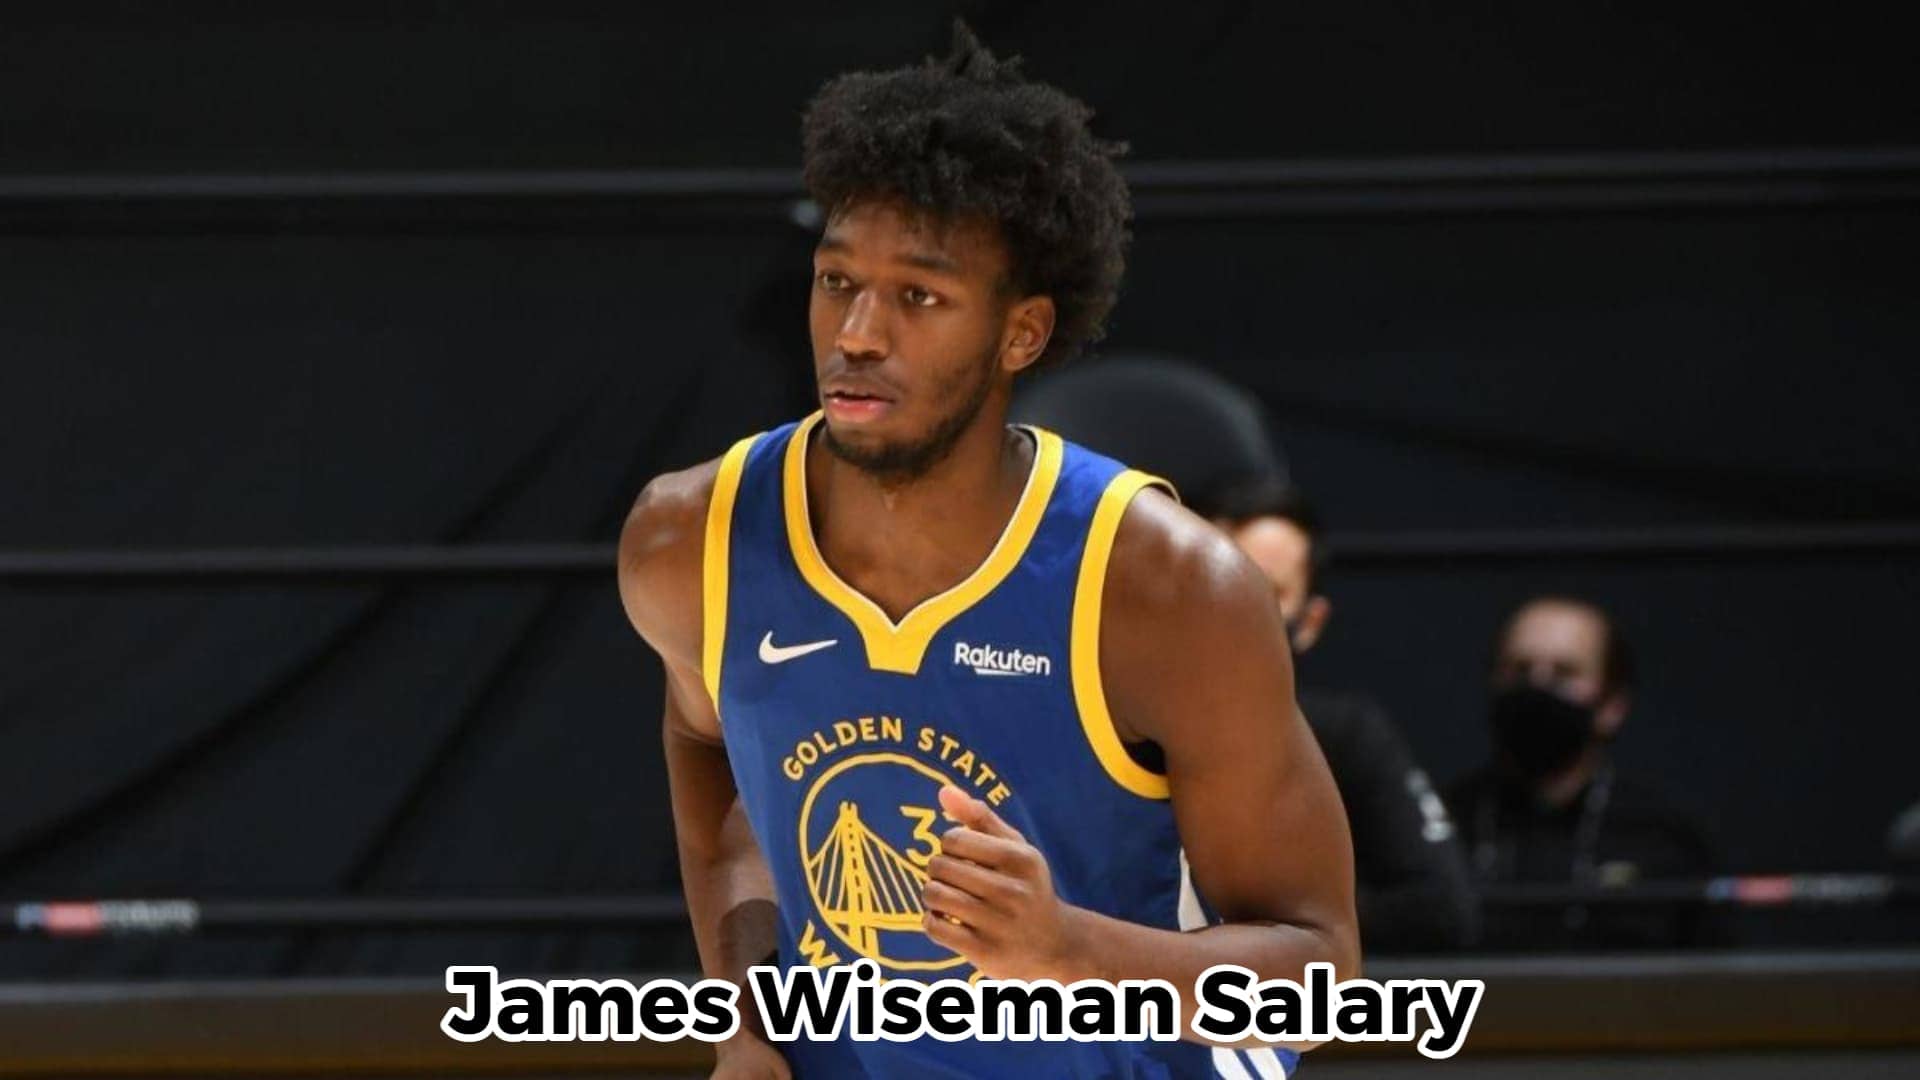 How much is James Wiseman Salary?